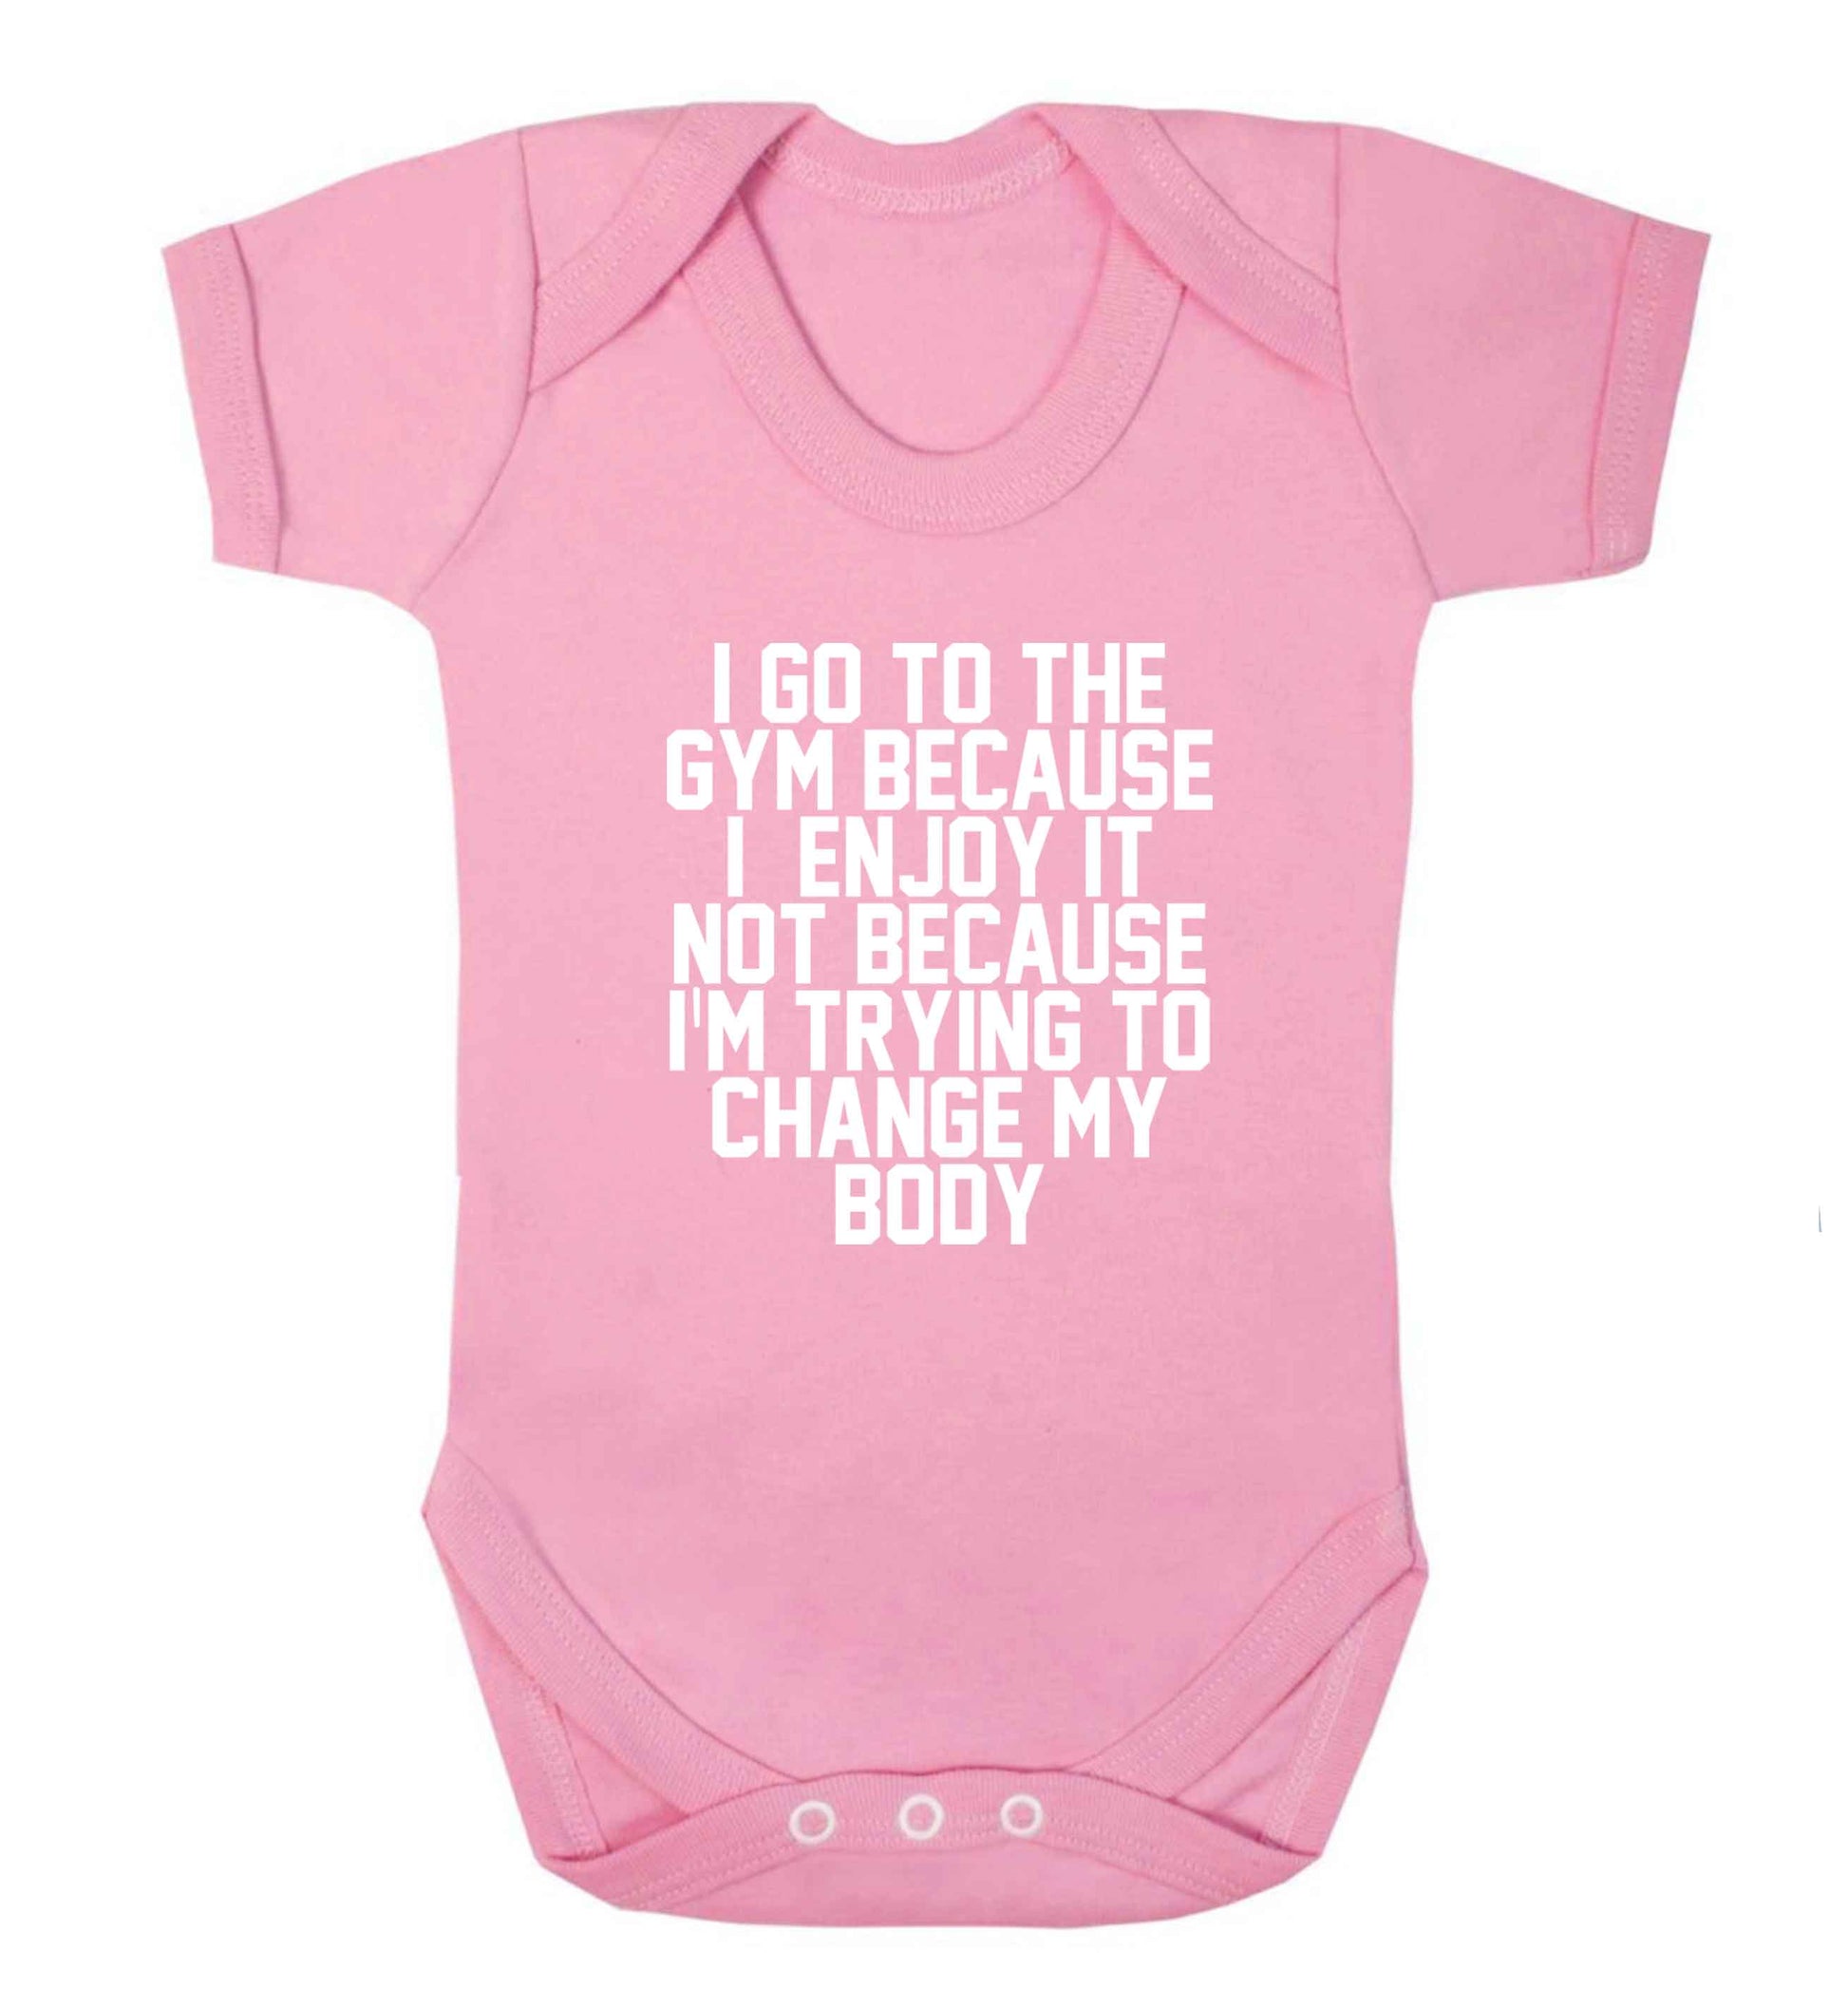 I go to the gym because I enjoy it not because I'm trying to change my body baby vest pale pink 18-24 months